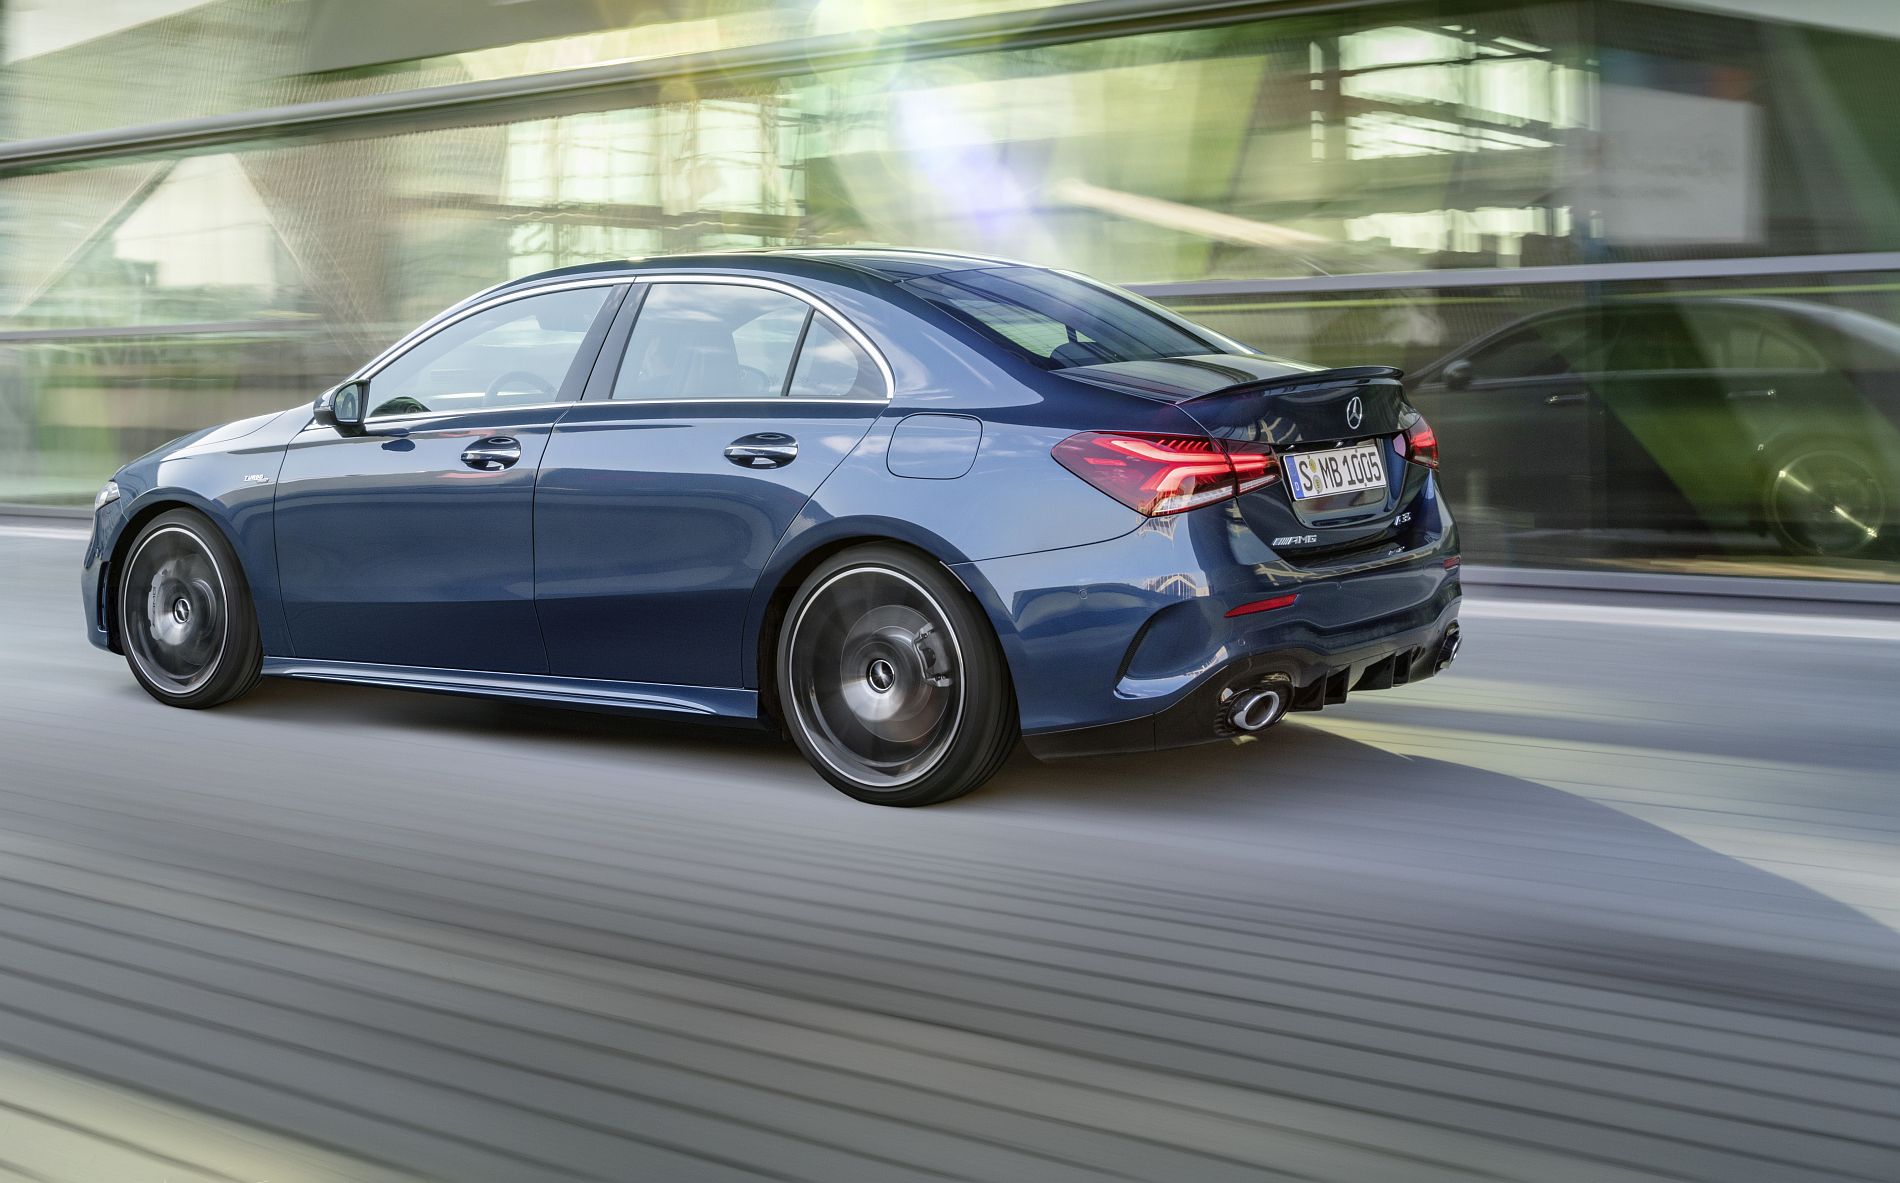 Die neue Mercedes-AMG A 35 4MATIC Limousine: AMG gibt Gas und erweitert die Kompaktwagenfamilie

The new Mercedes-AMG A 35 4MATIC Saloon: AMG speeds things up by expanding the compact car family